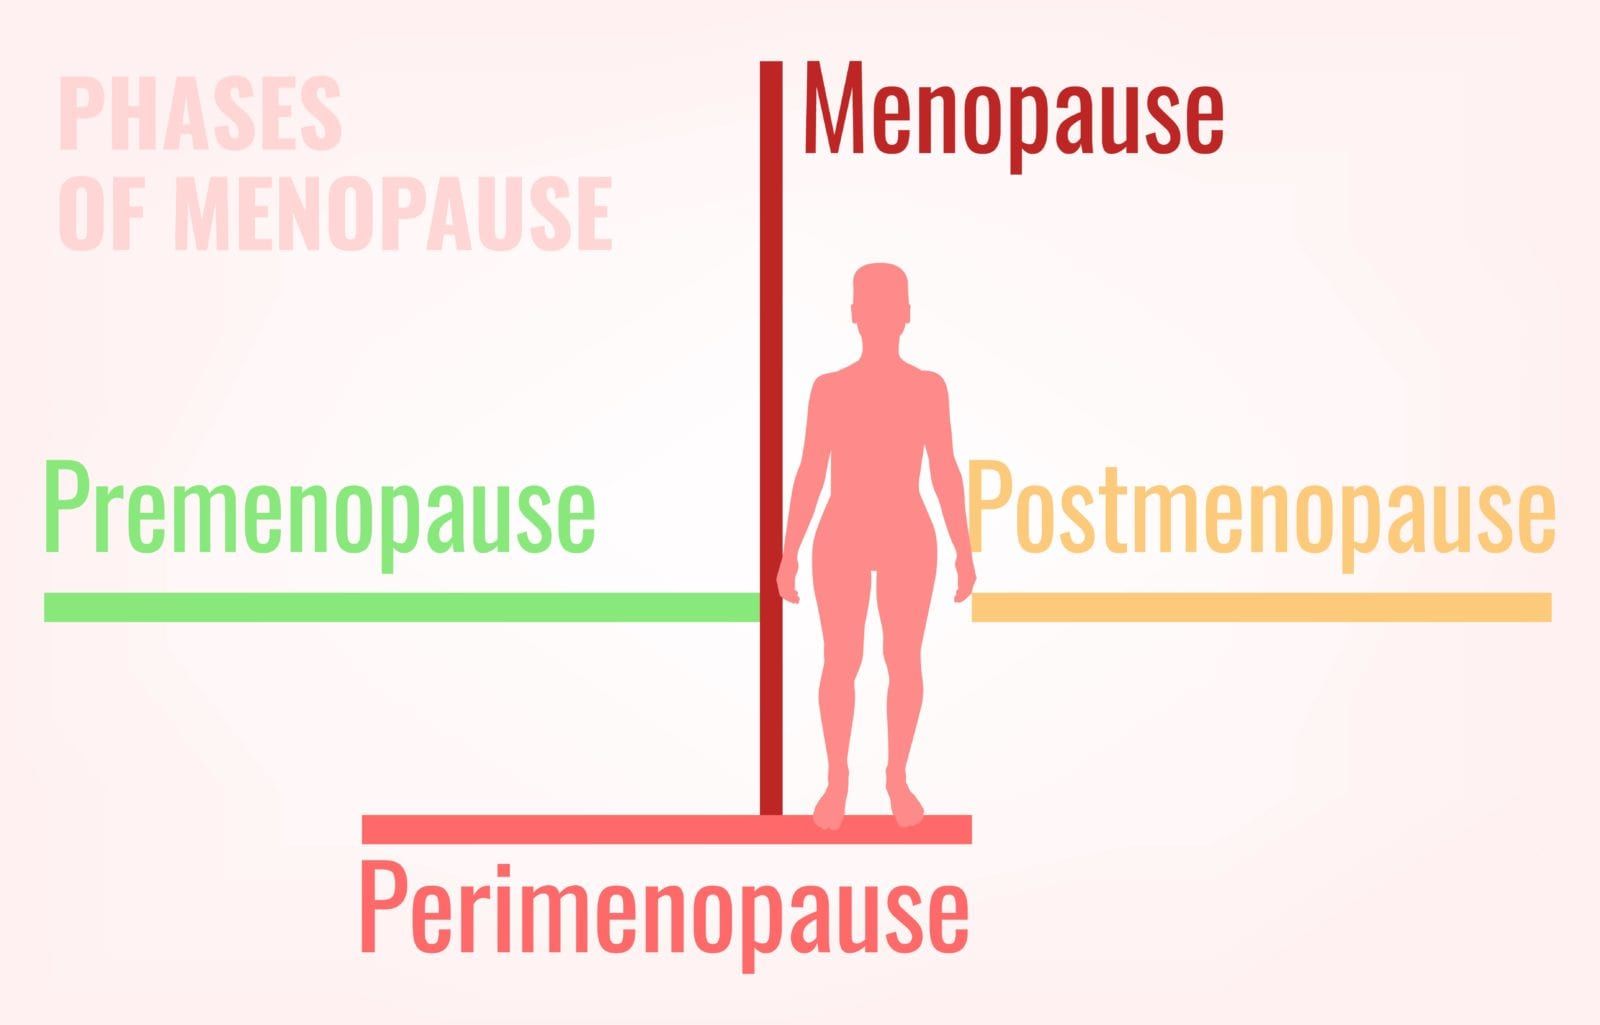 phases of menopause timeline